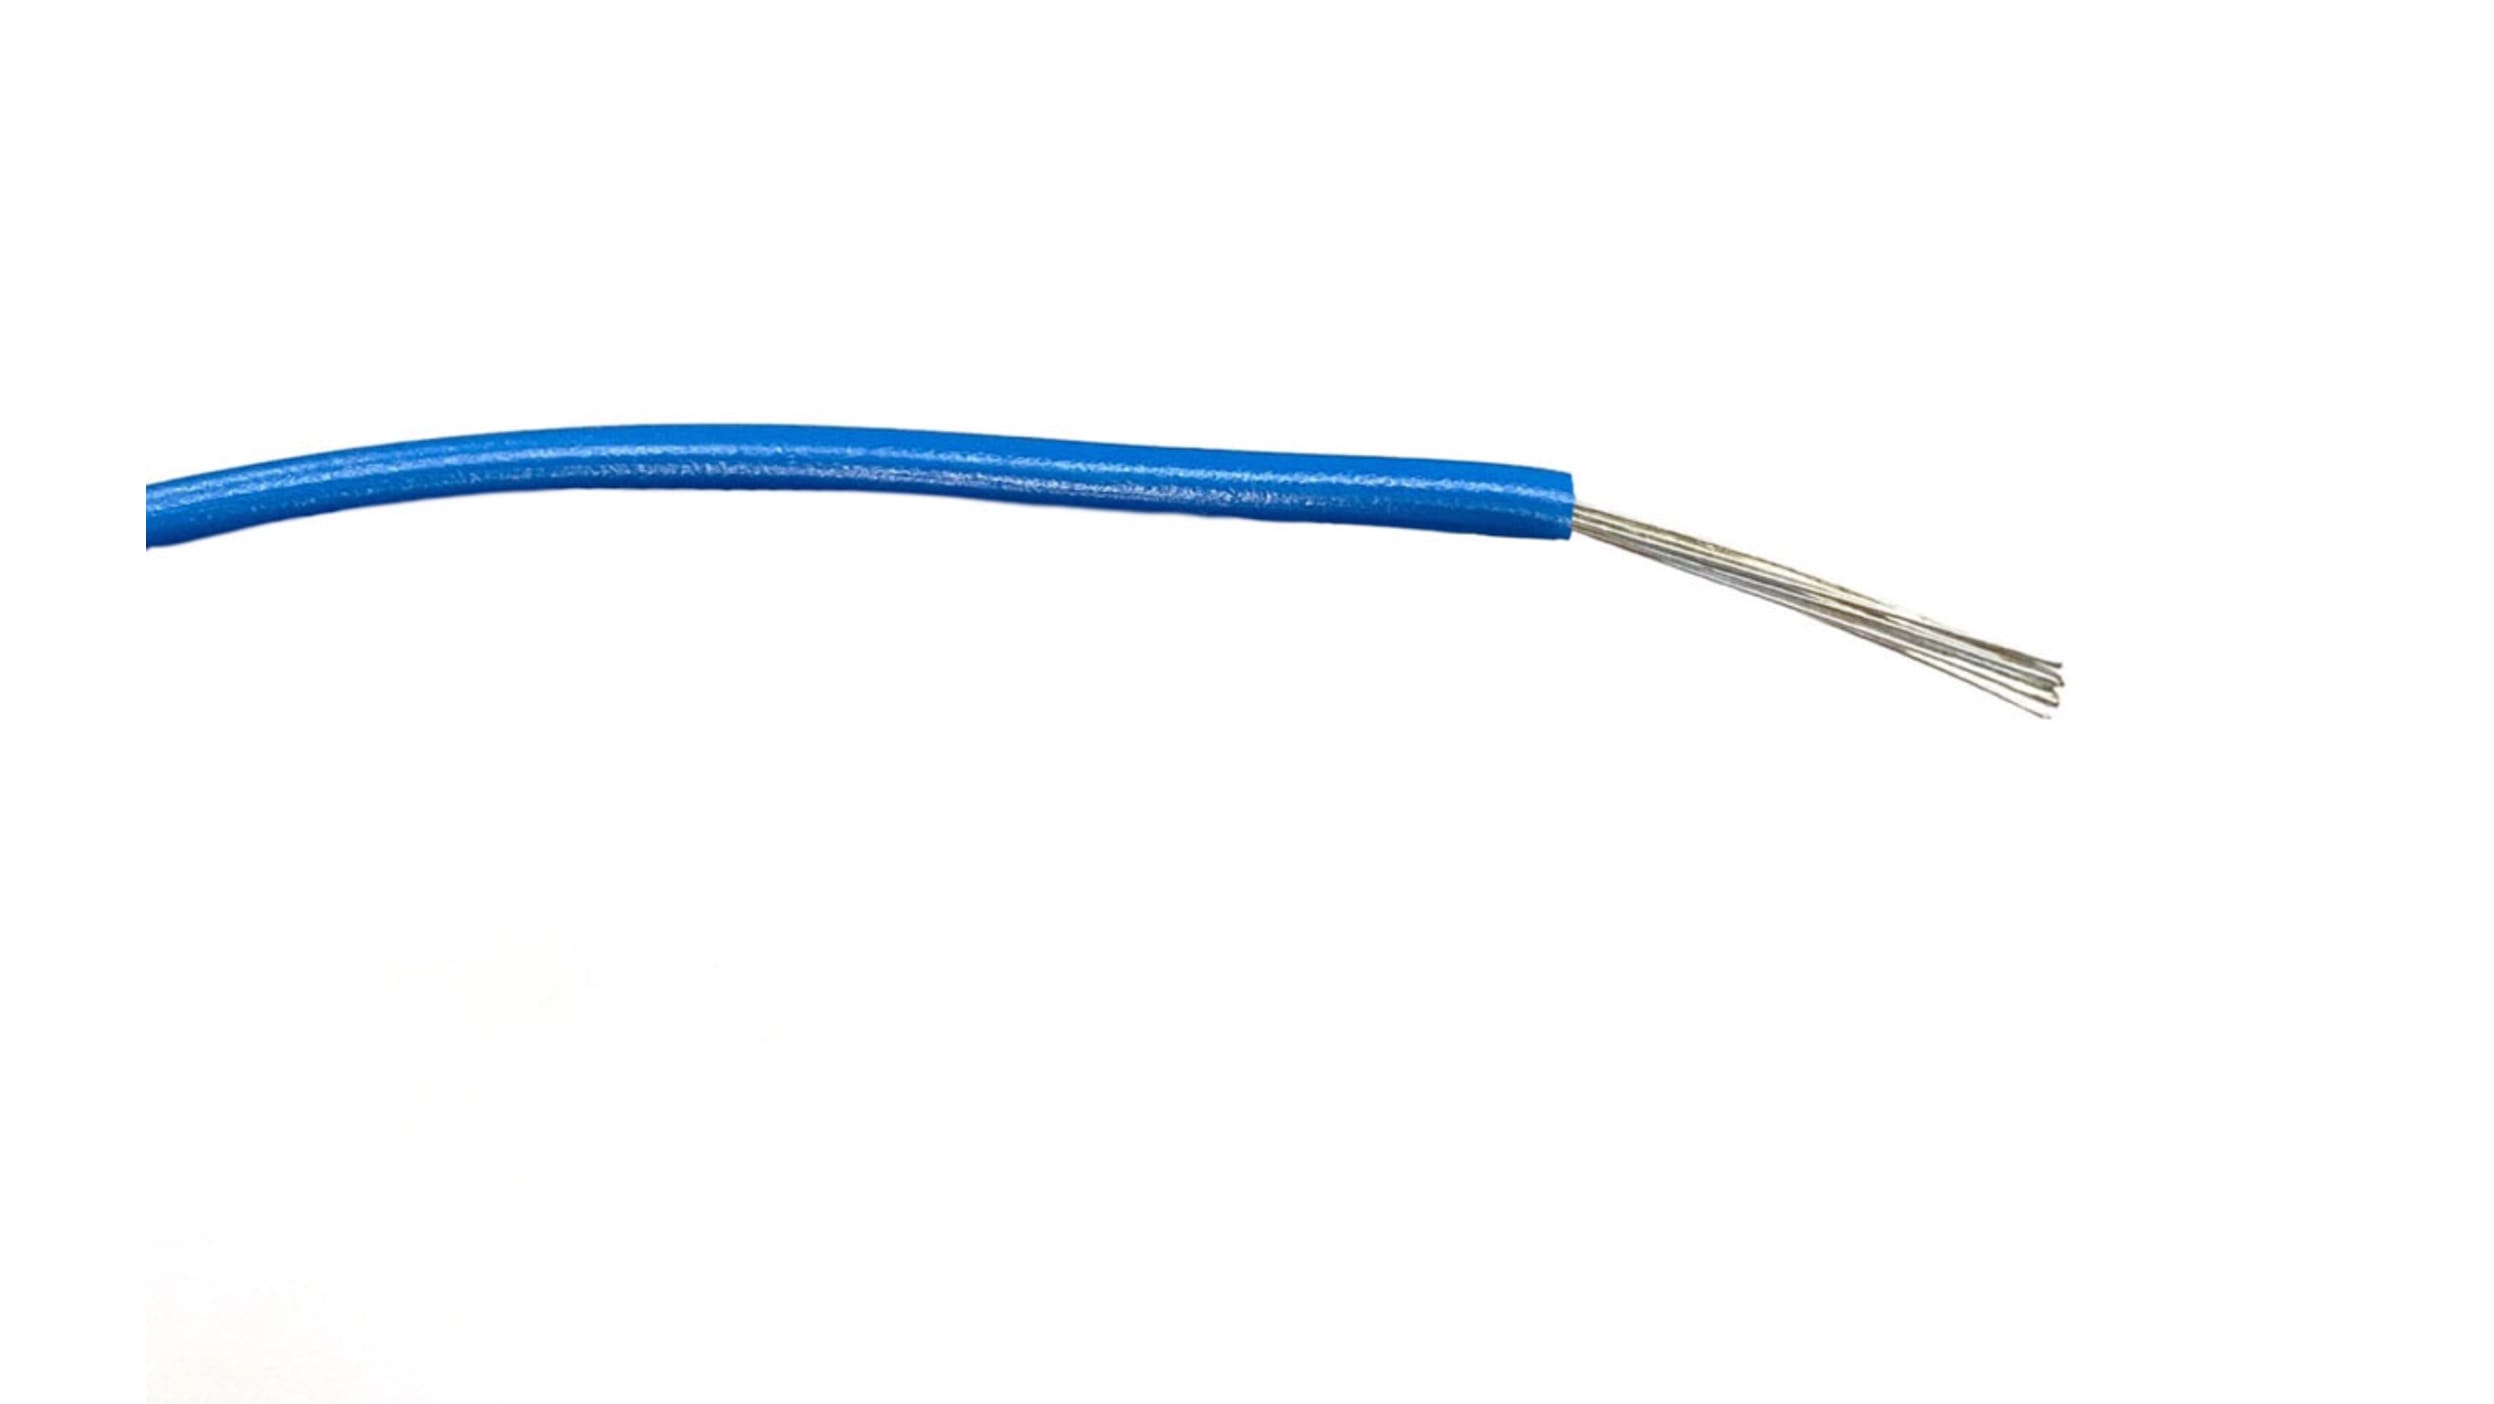 RS PRO Blue 0.75 mm² Hook Up Wire, 18 AWG, 24/0.2 mm, 500m, PVC